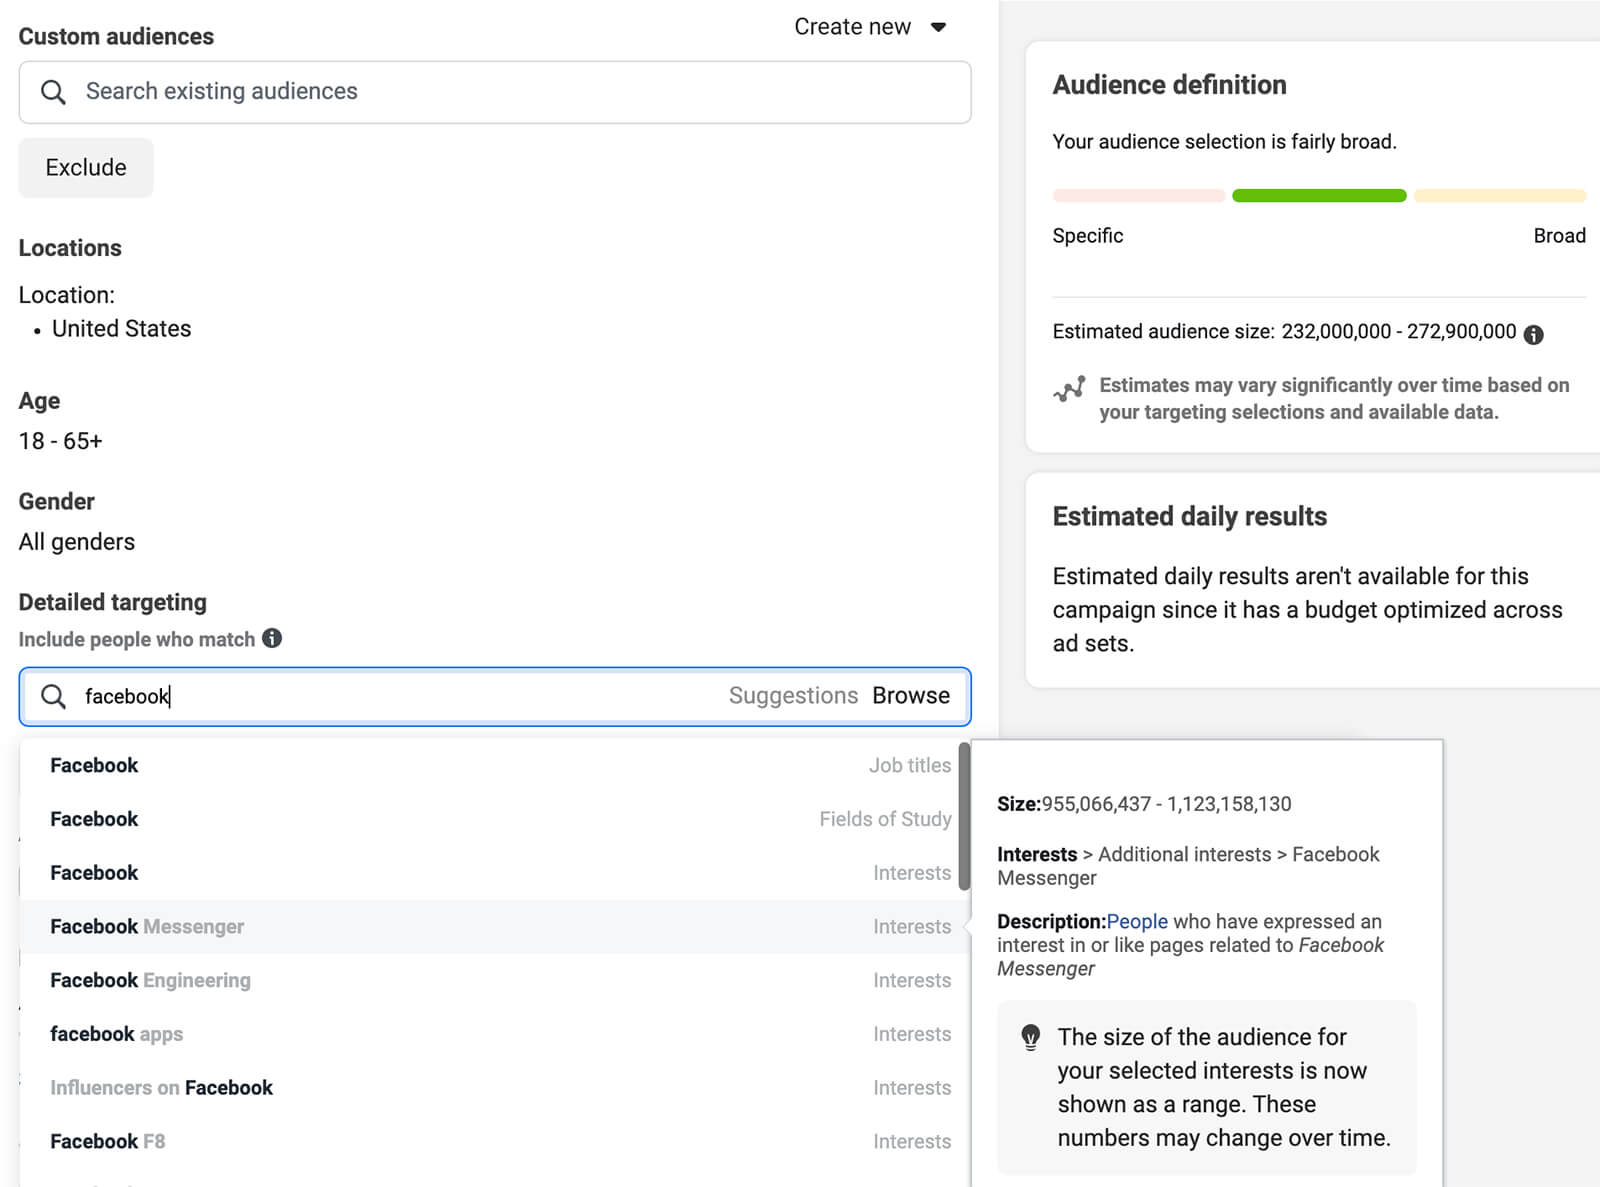 how-to-use-targeting-to-get-in-front-of-competitor-audiences-on-facebook-add-competitor-to-saved-audiences-custom-example-11